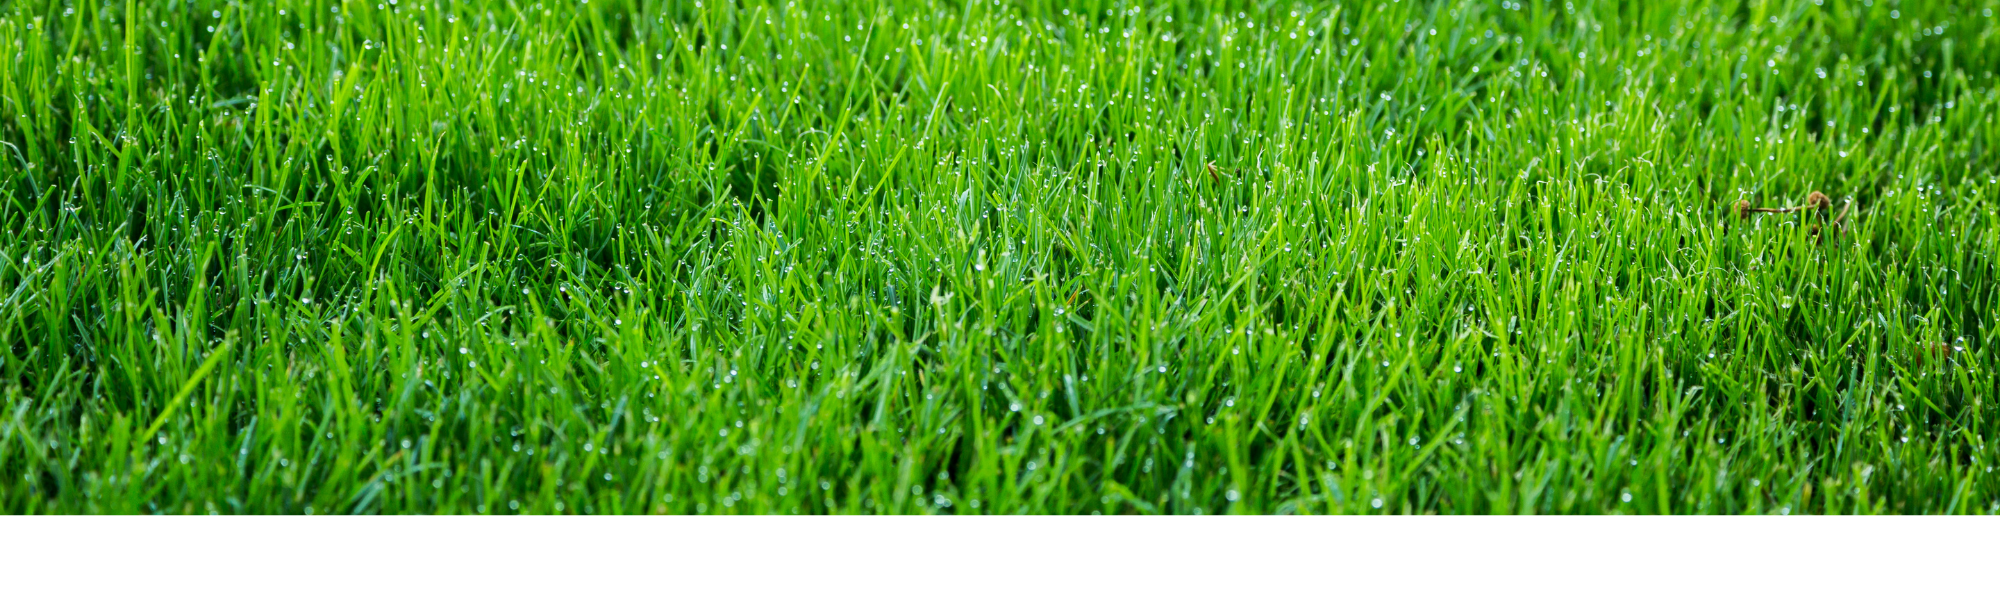 up-close view of green lawn